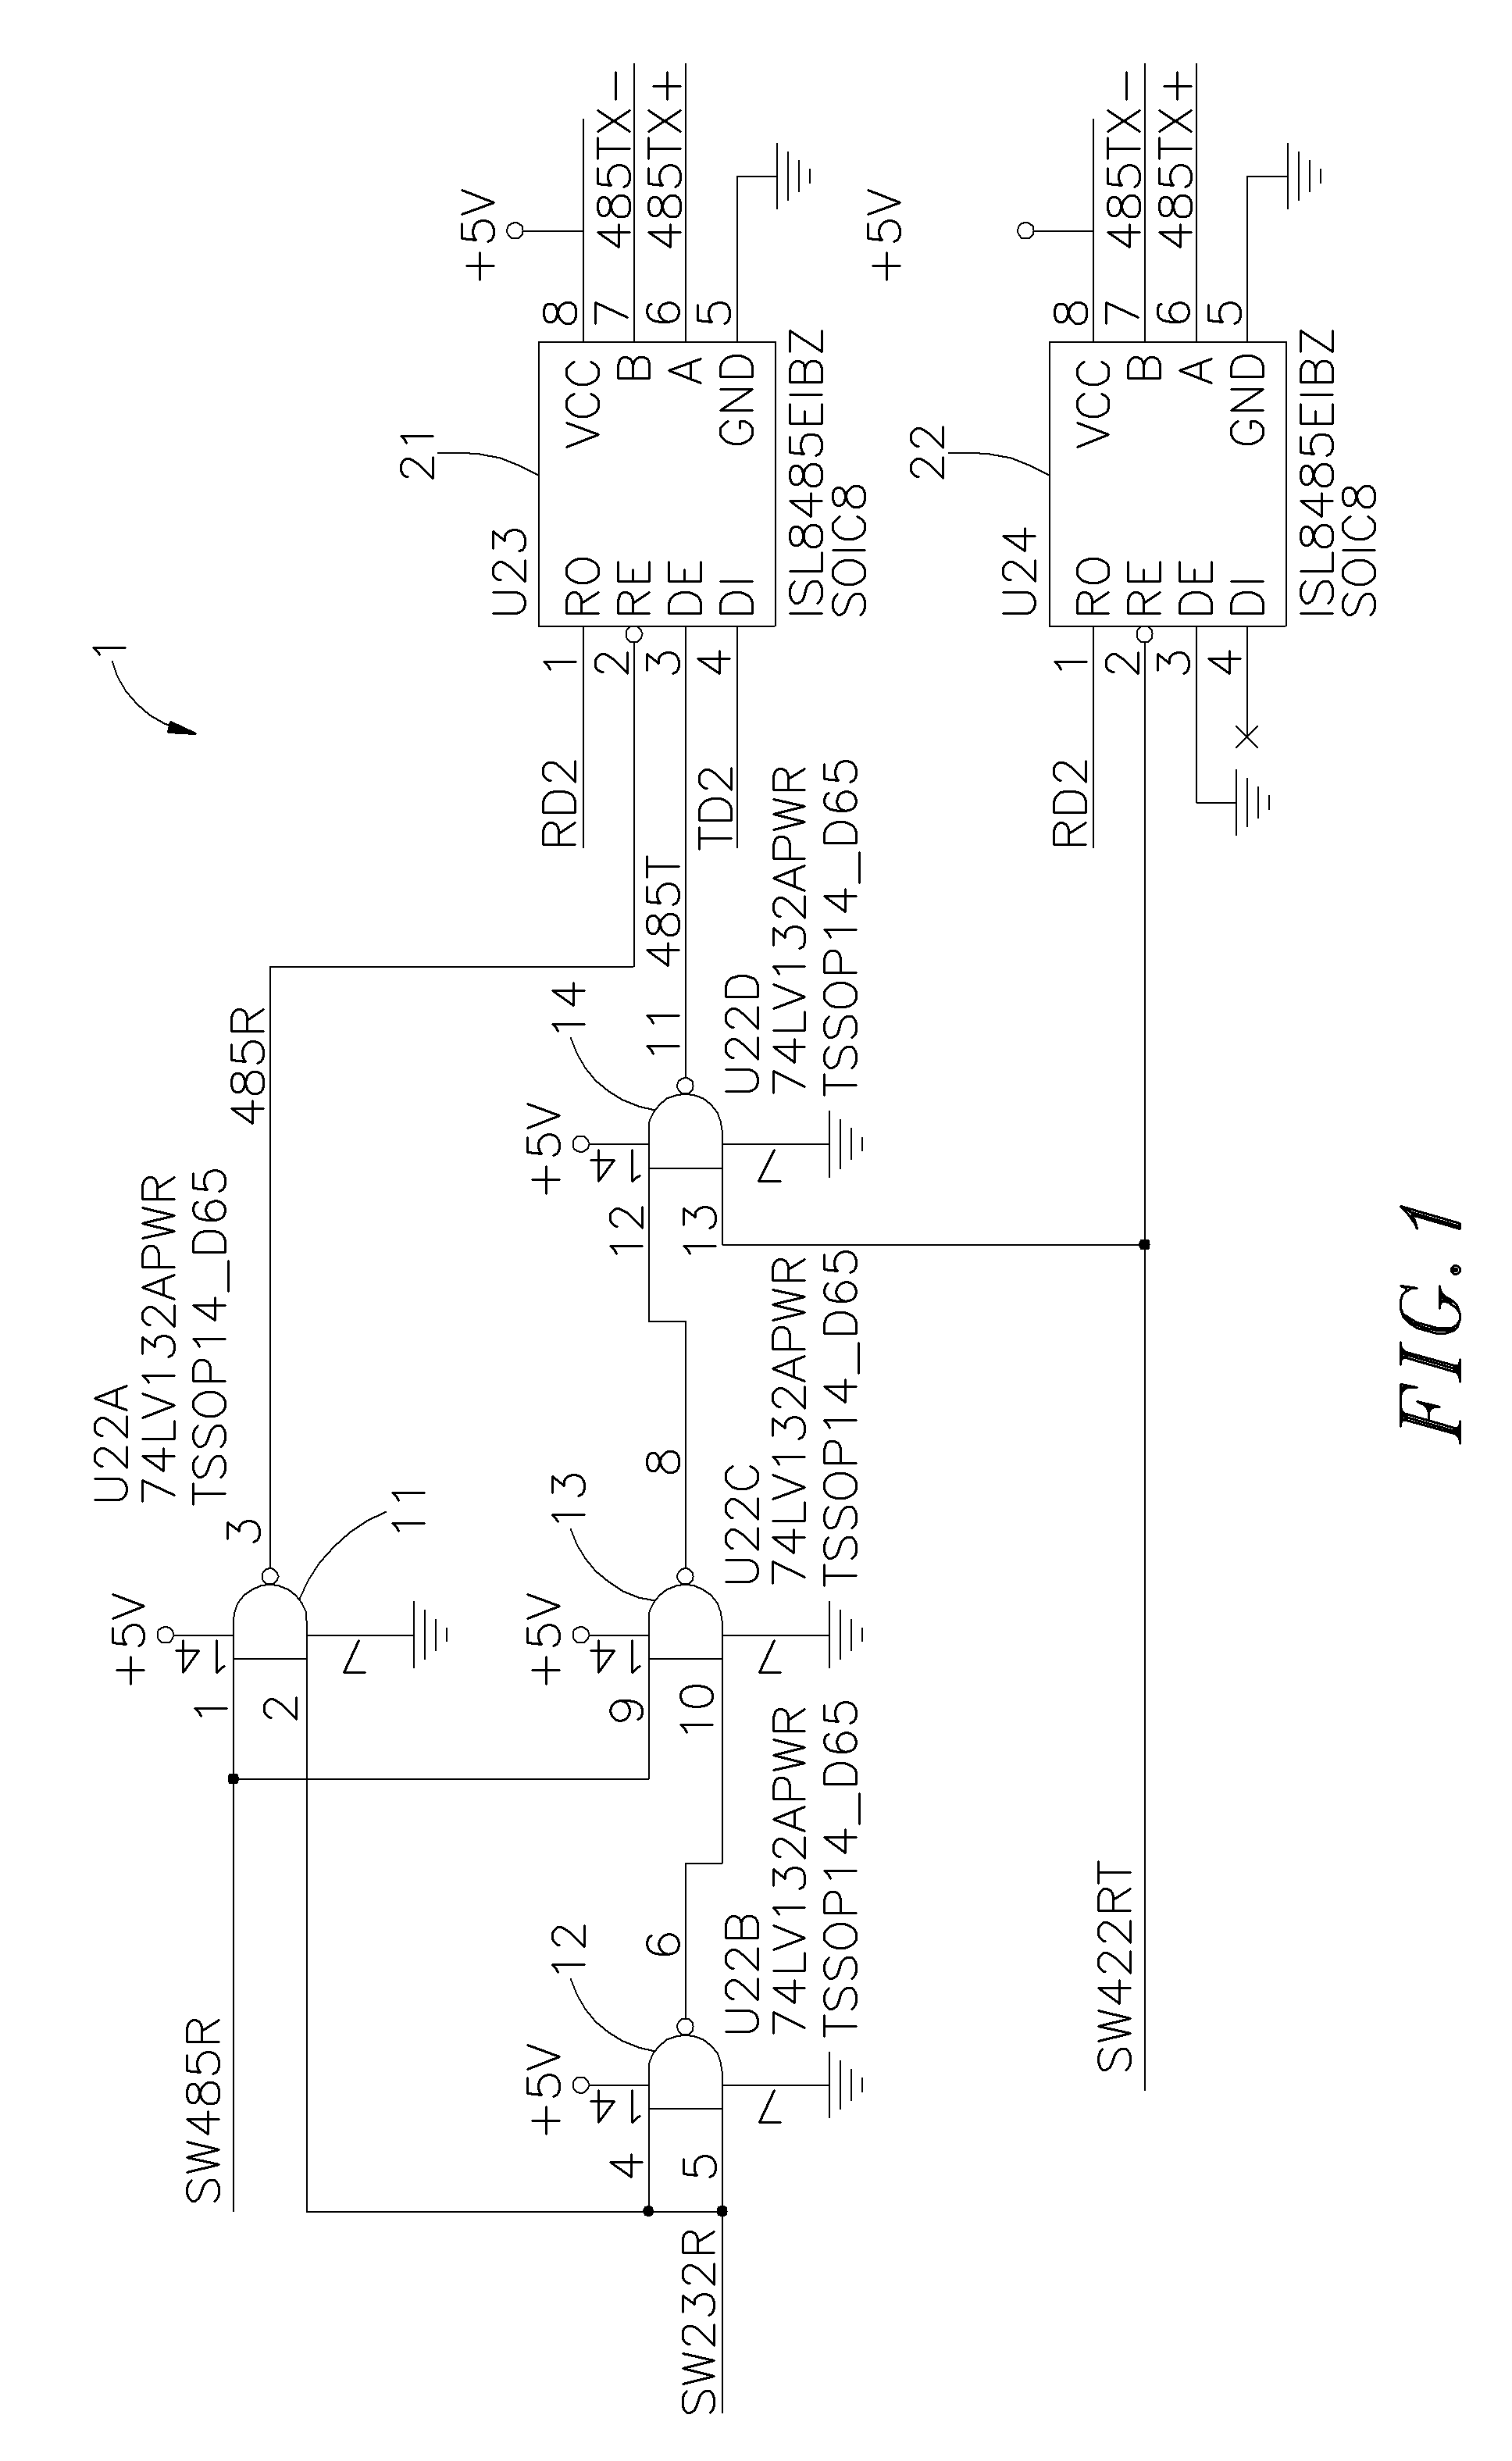 Method for setting up a serial communication port configuration